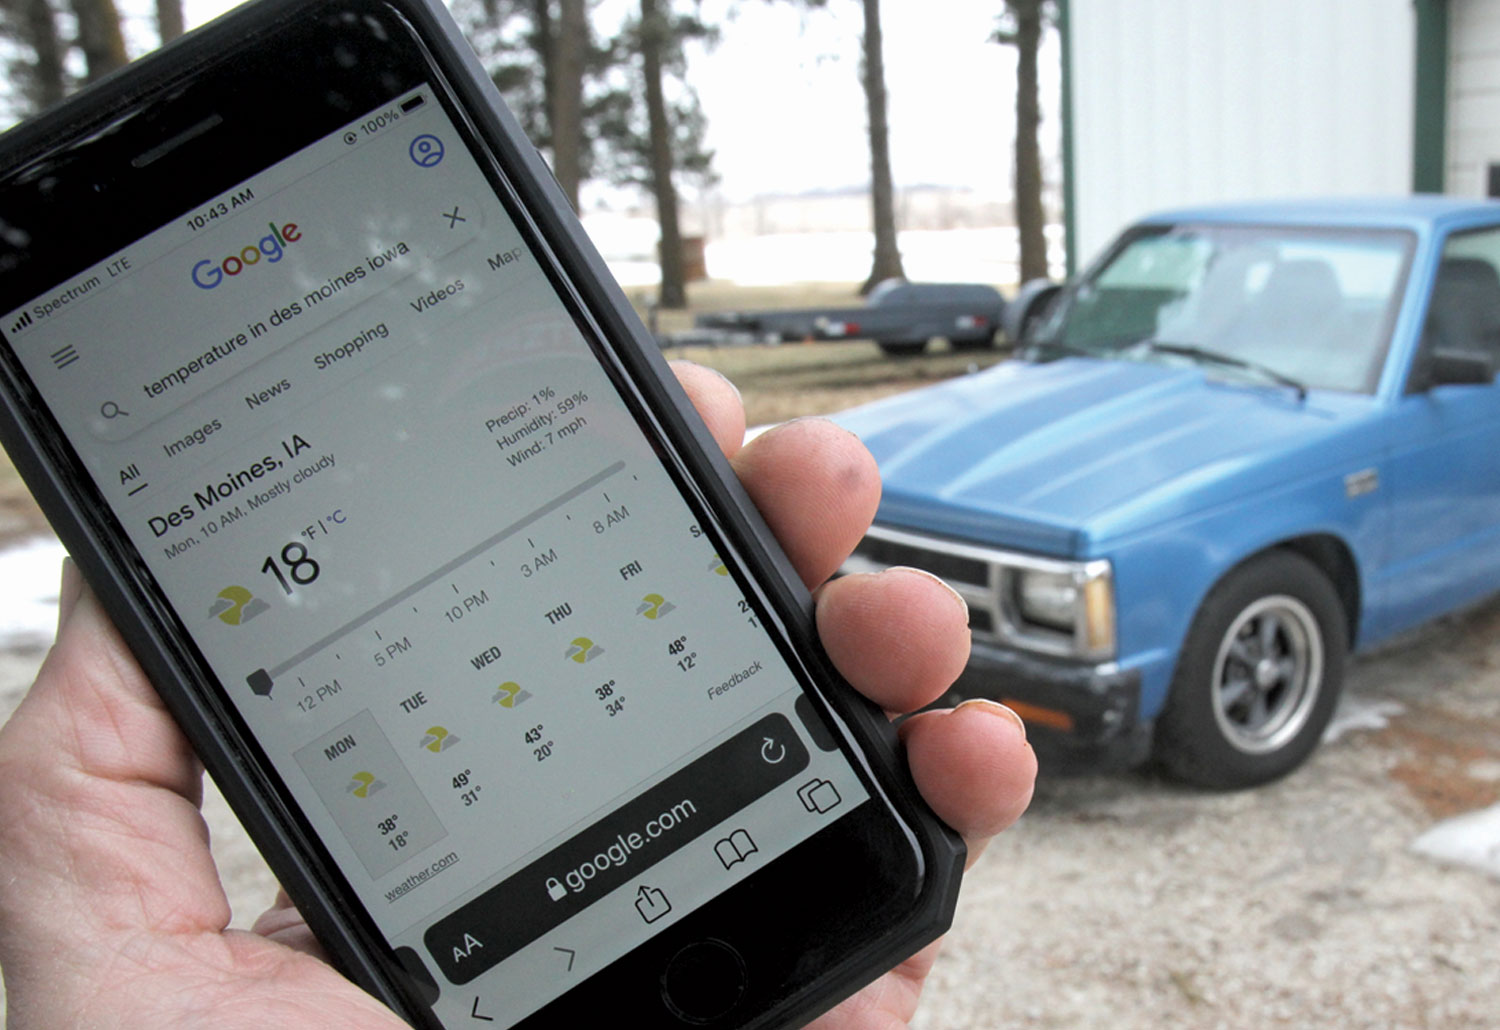 mechanic holds a smartphone showing the temperature of Des Moines, IA while the S-10 truck sits parked in the background